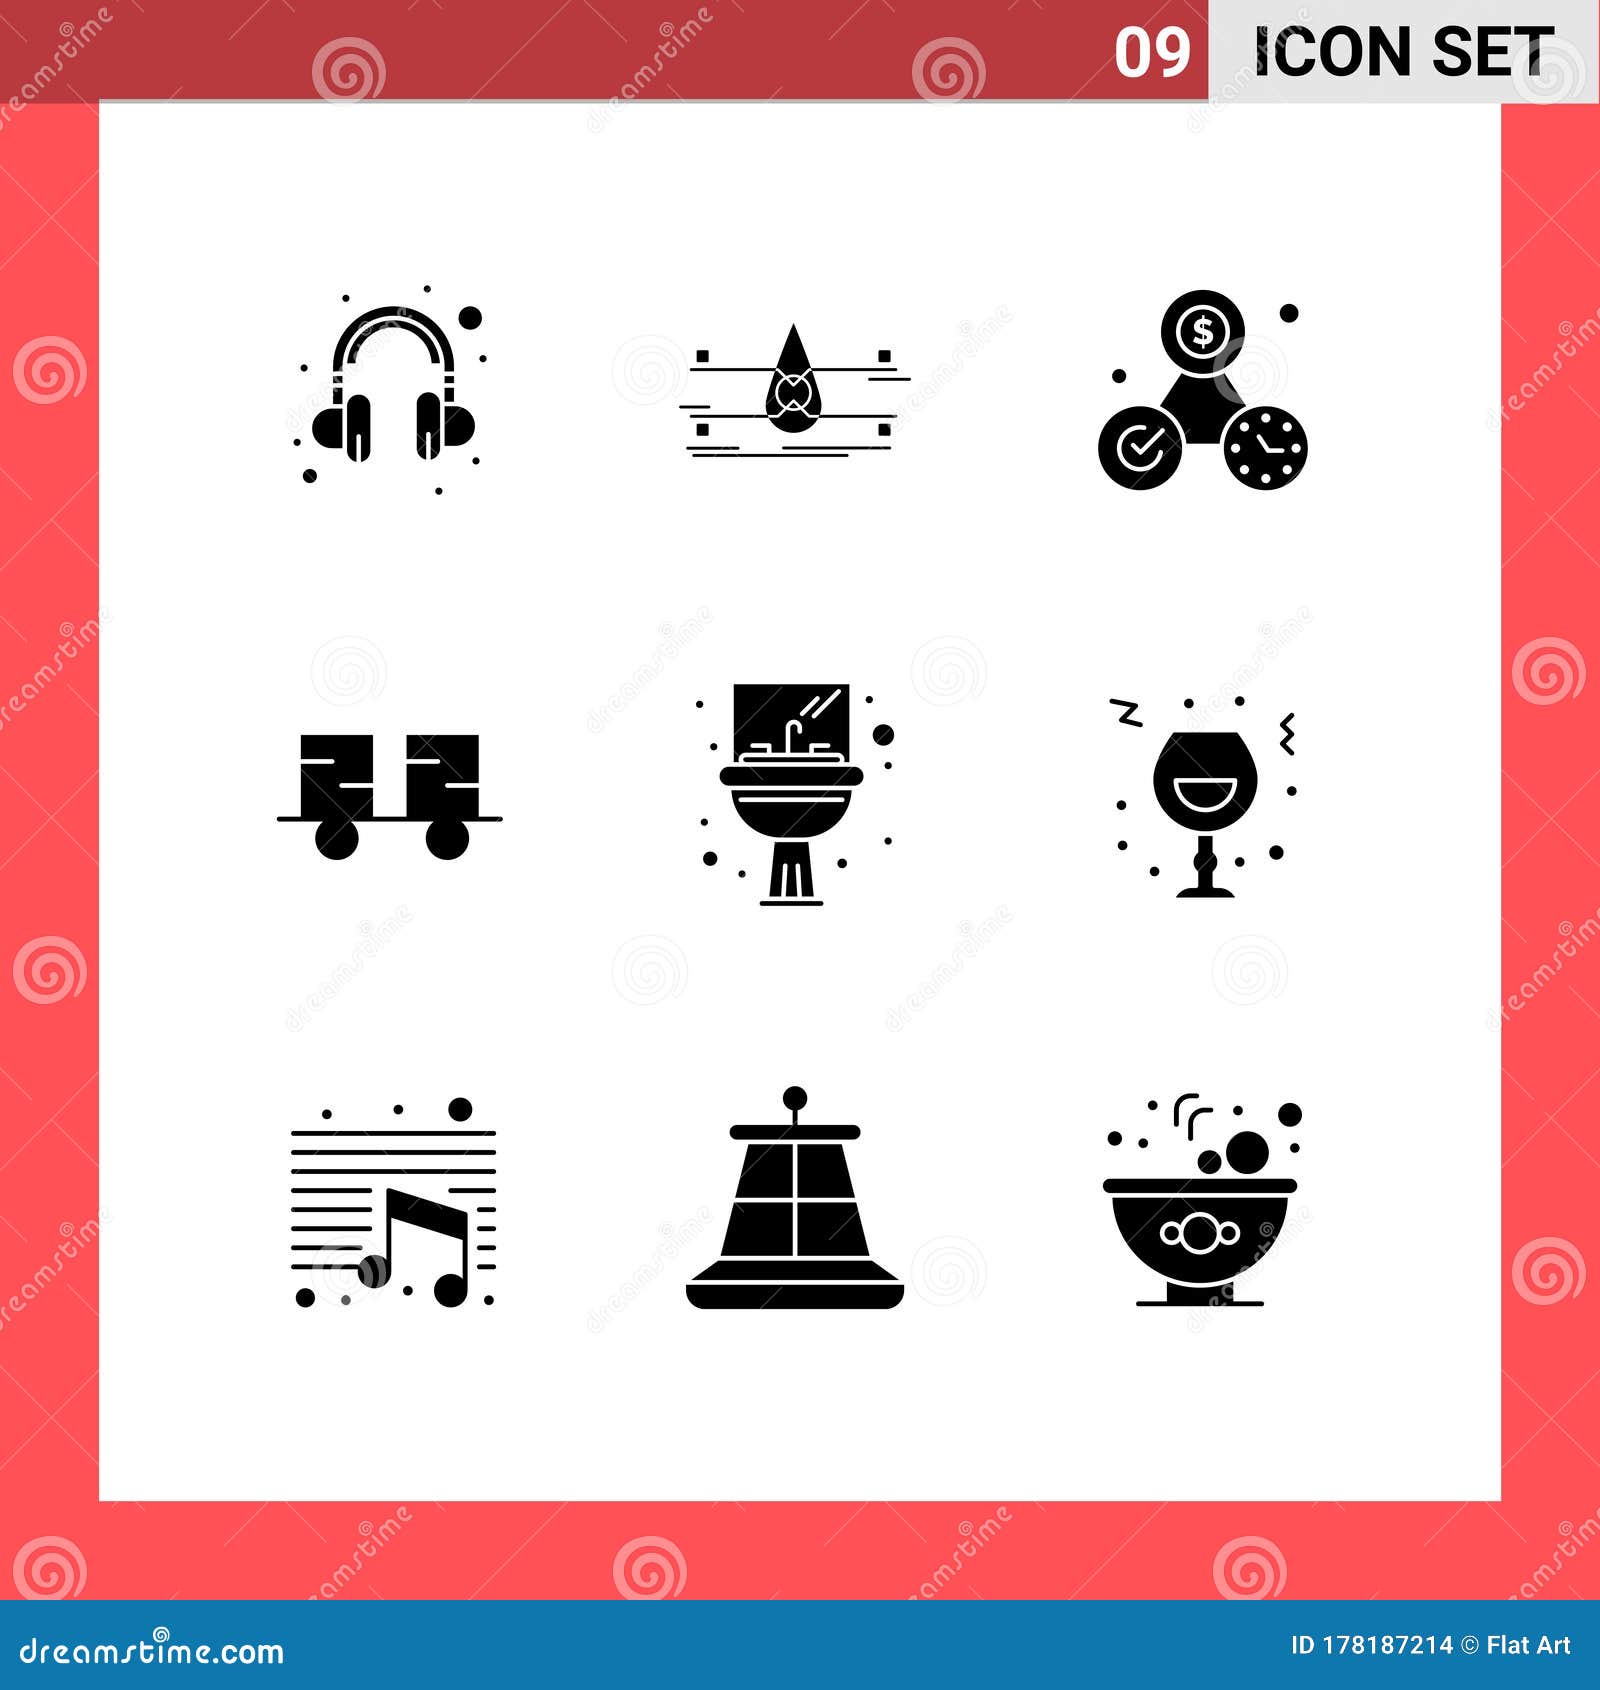 9 User Interface Solid Glyph Pack Of Modern Signs And Symbols Of Bathroom Forklift Truck Clock Forklift Caterpillar Vehicles Stock Vector Illustration Of Celebration Nautical 178187214